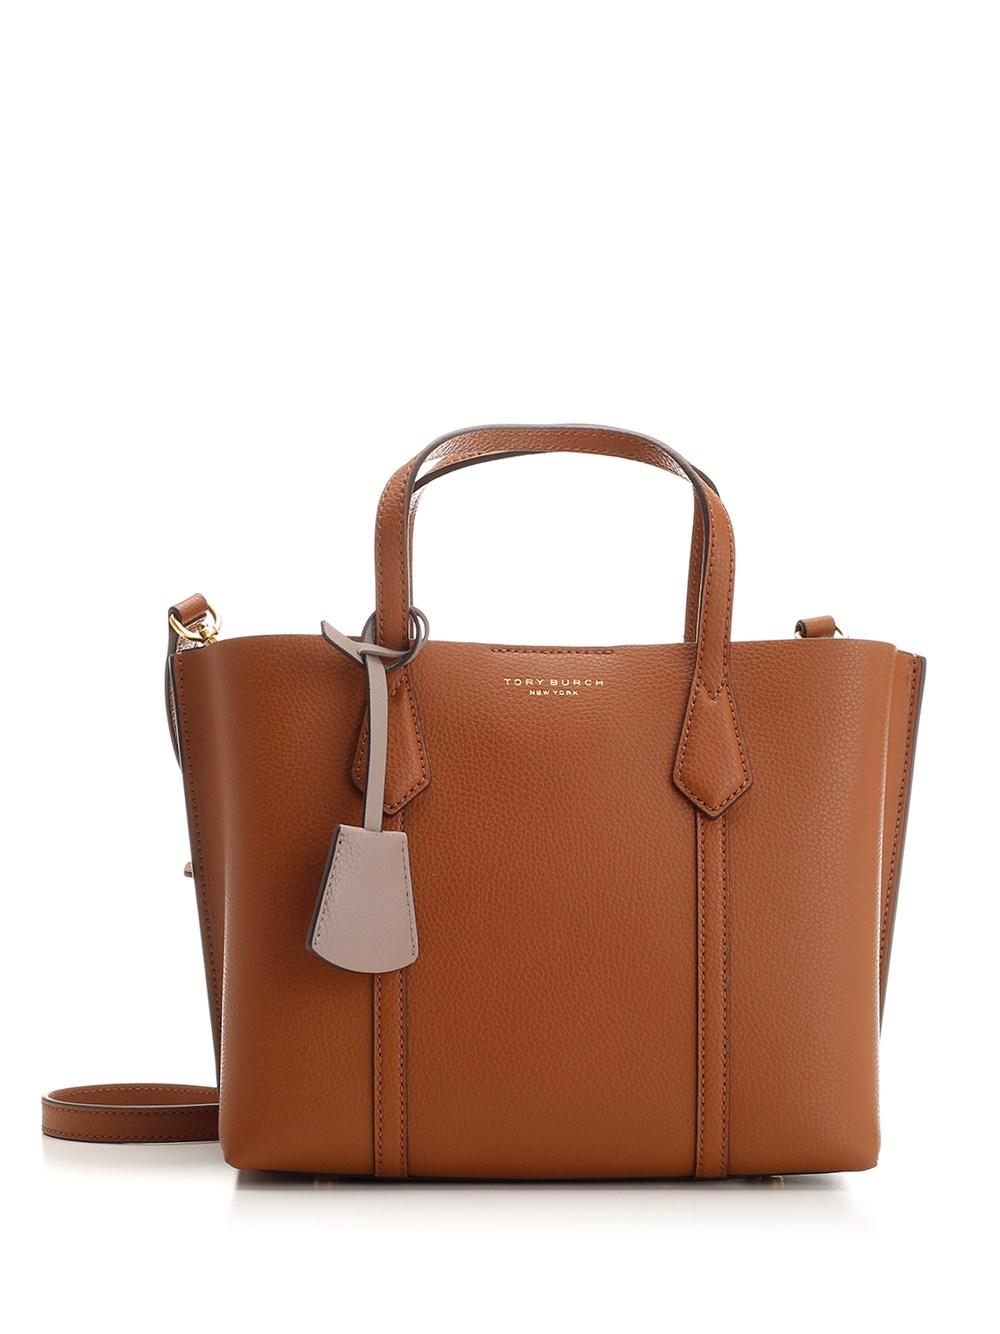 Tory Burch Brown Leather Tote Bag | Lyst